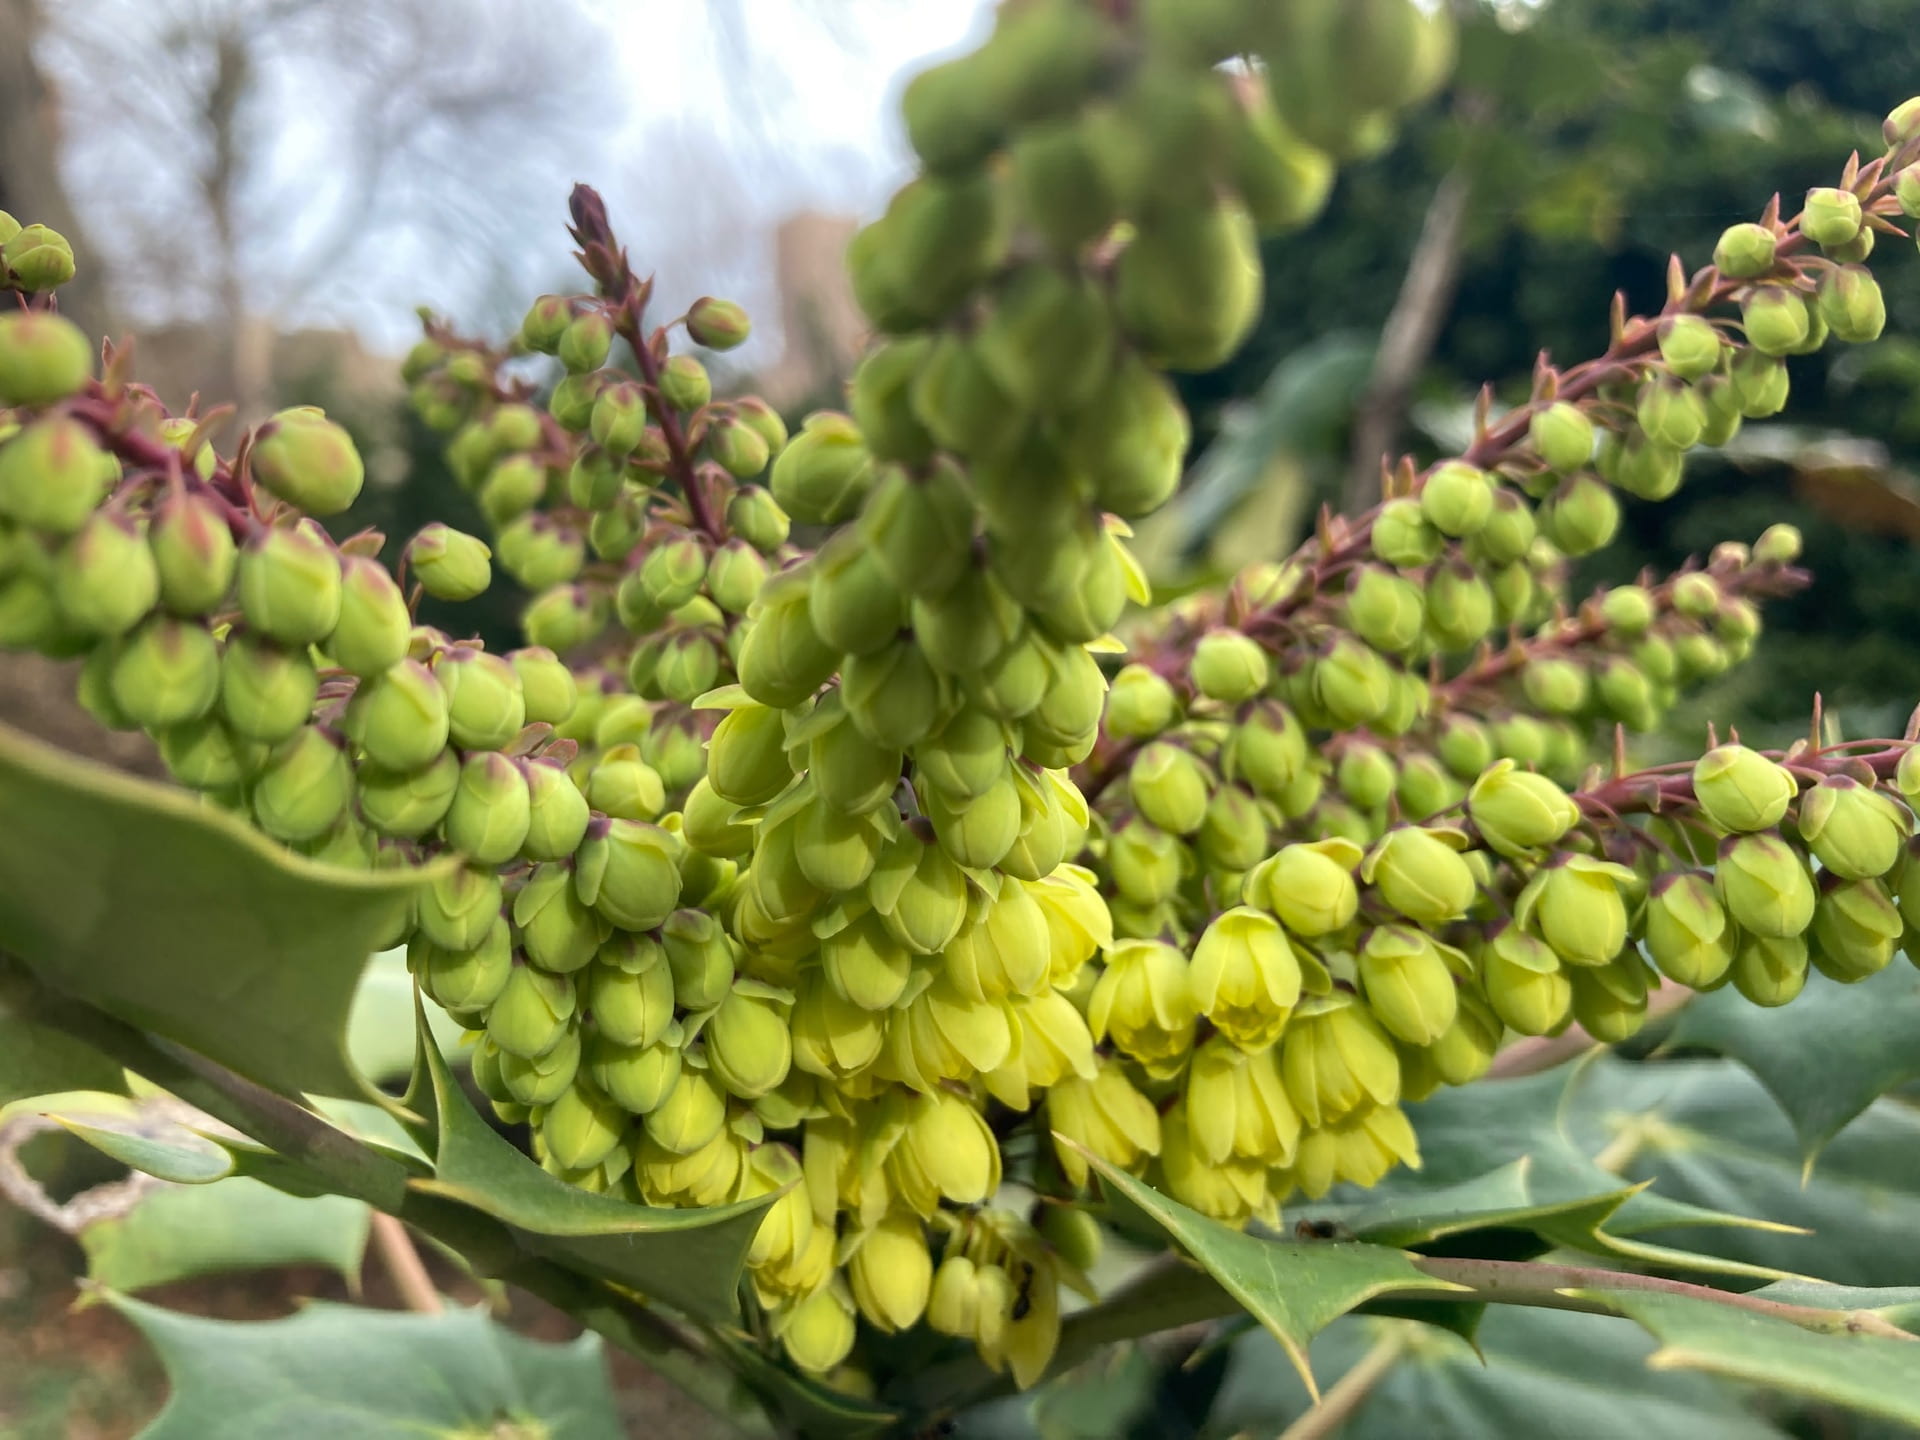 Mahonia bealei's acid yellow flower spikes stand out against its deep green leaves.